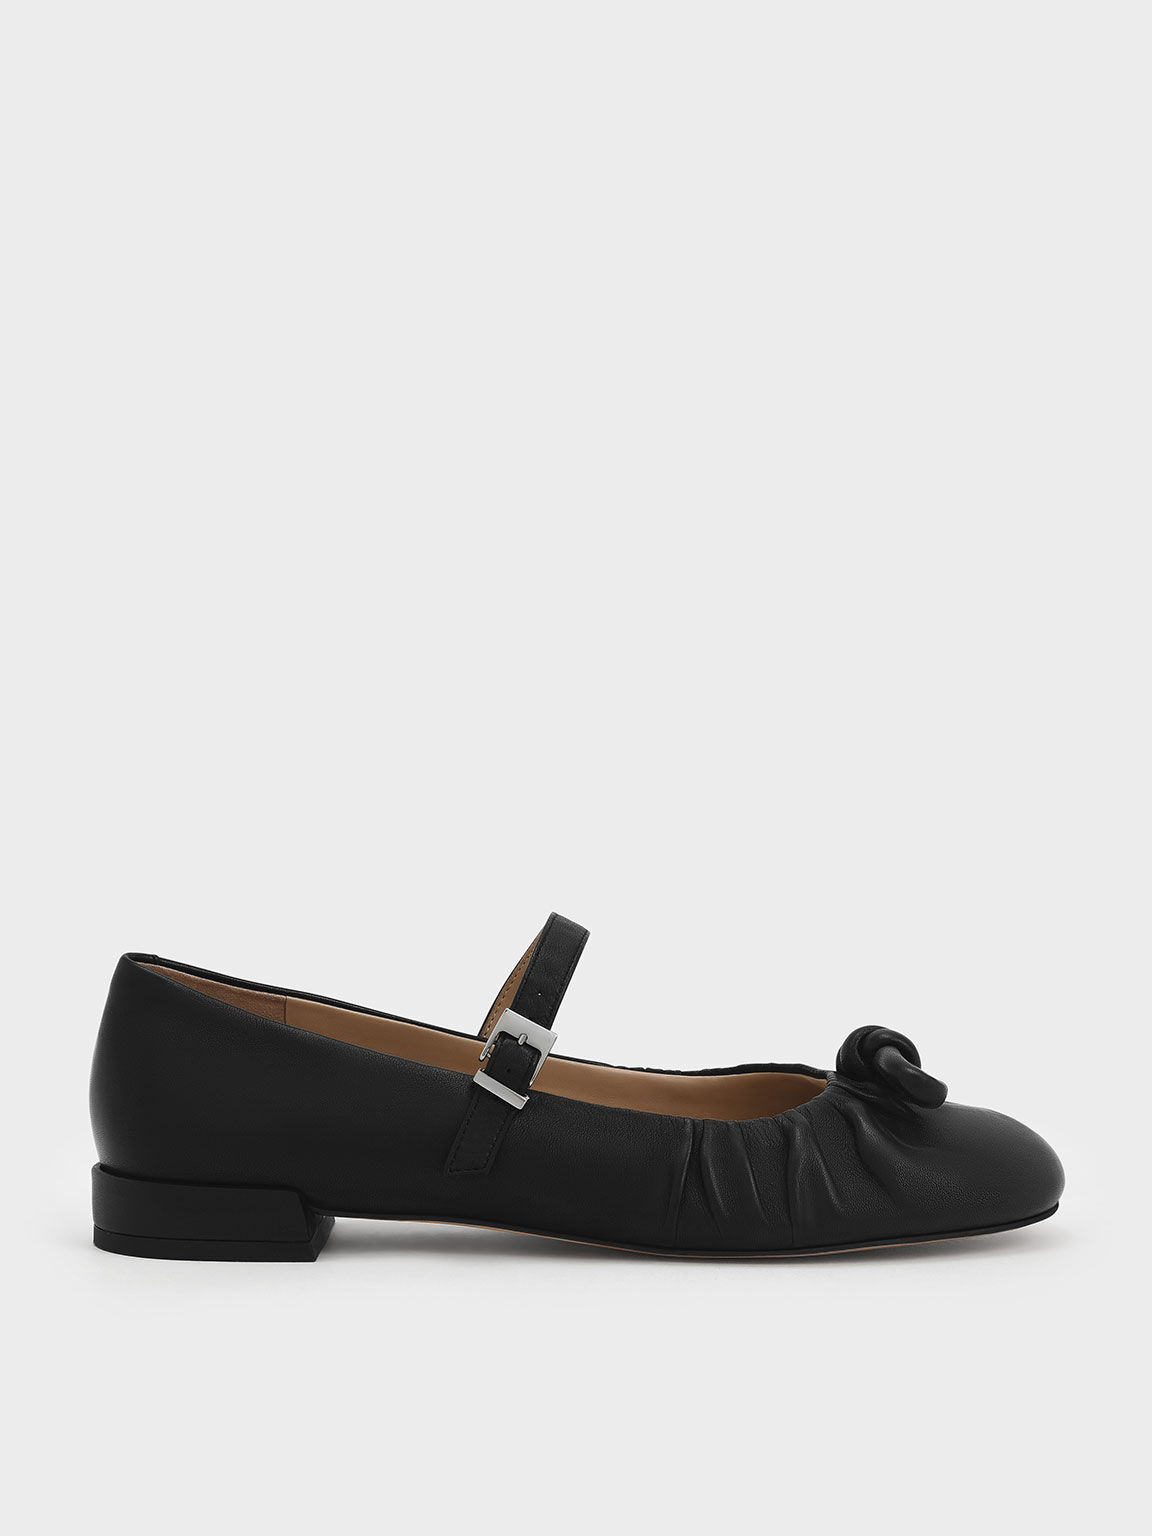 Leather Knotted Ruched Mary Jane Flats, Black, hi-res